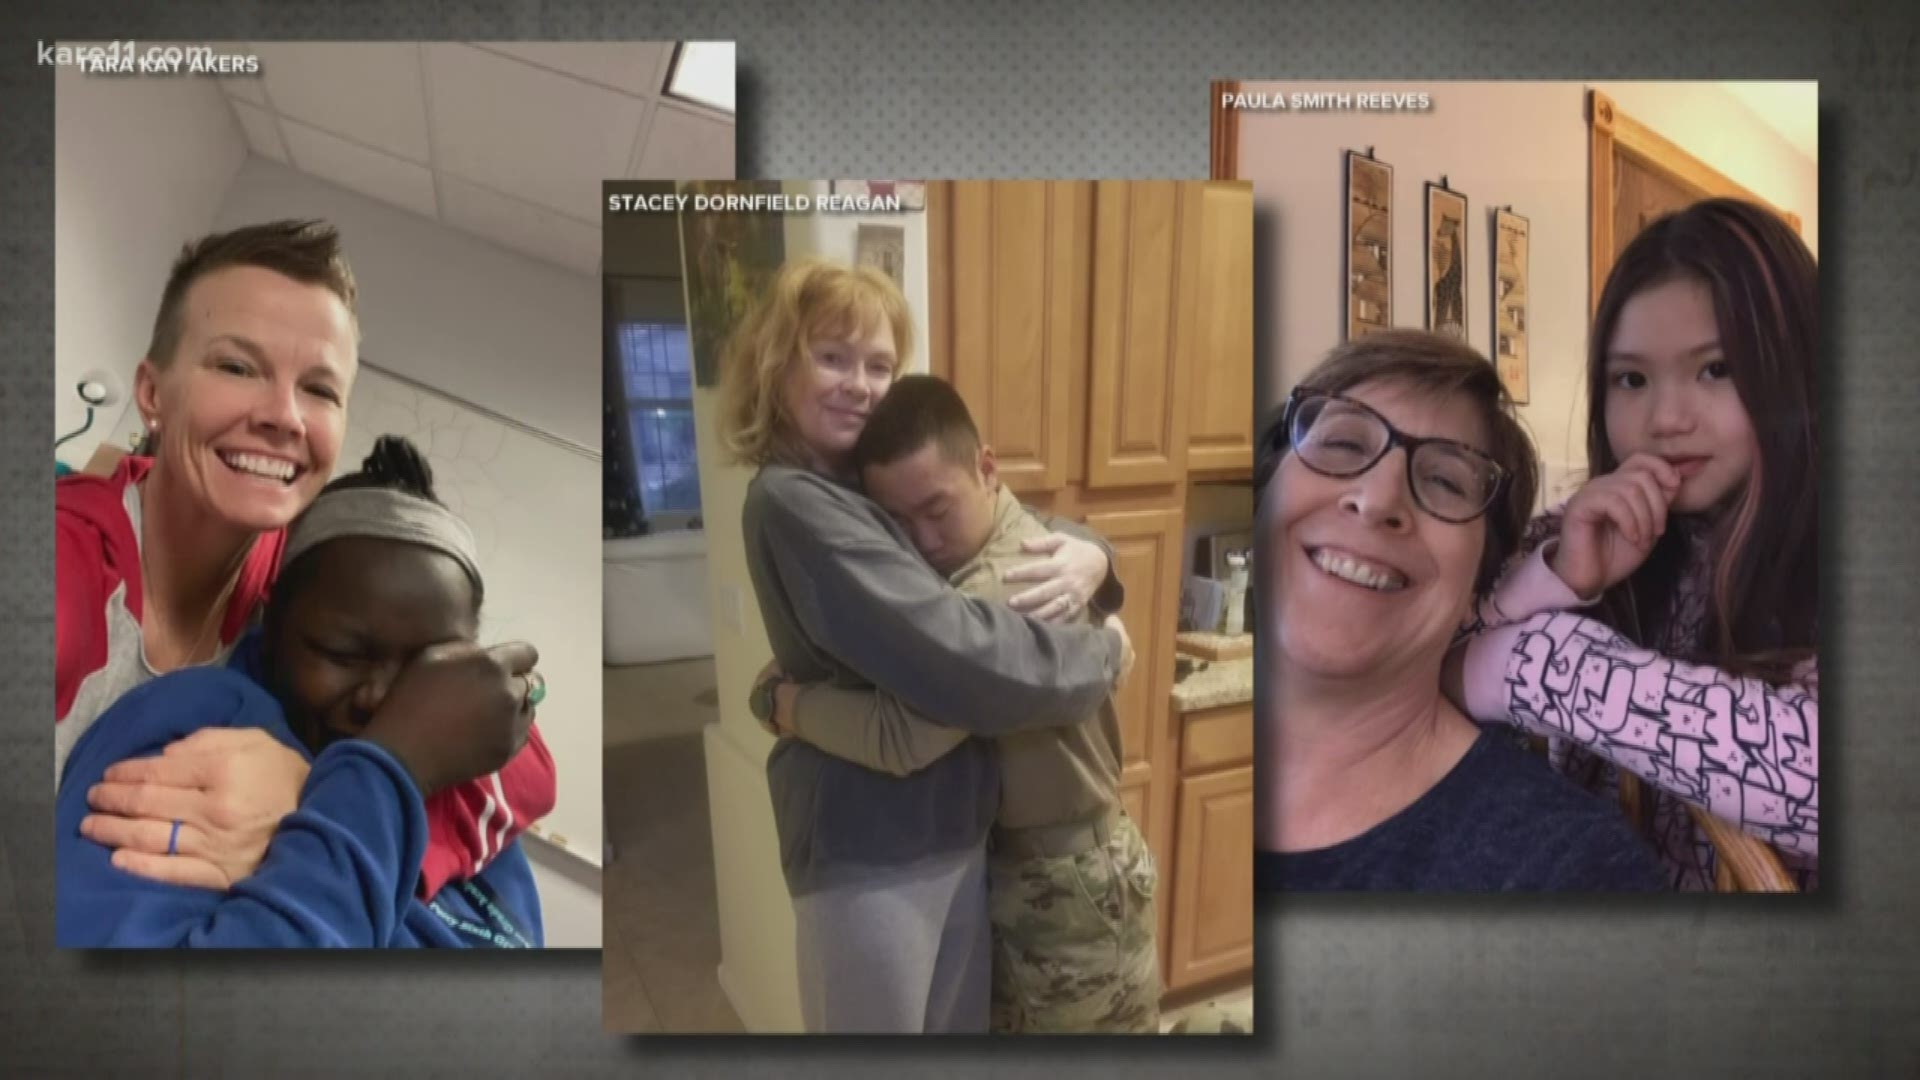 Jana Shortal asked KARE viewers to share photos of the hugs they now miss because of social distancing due to the coronavirus.